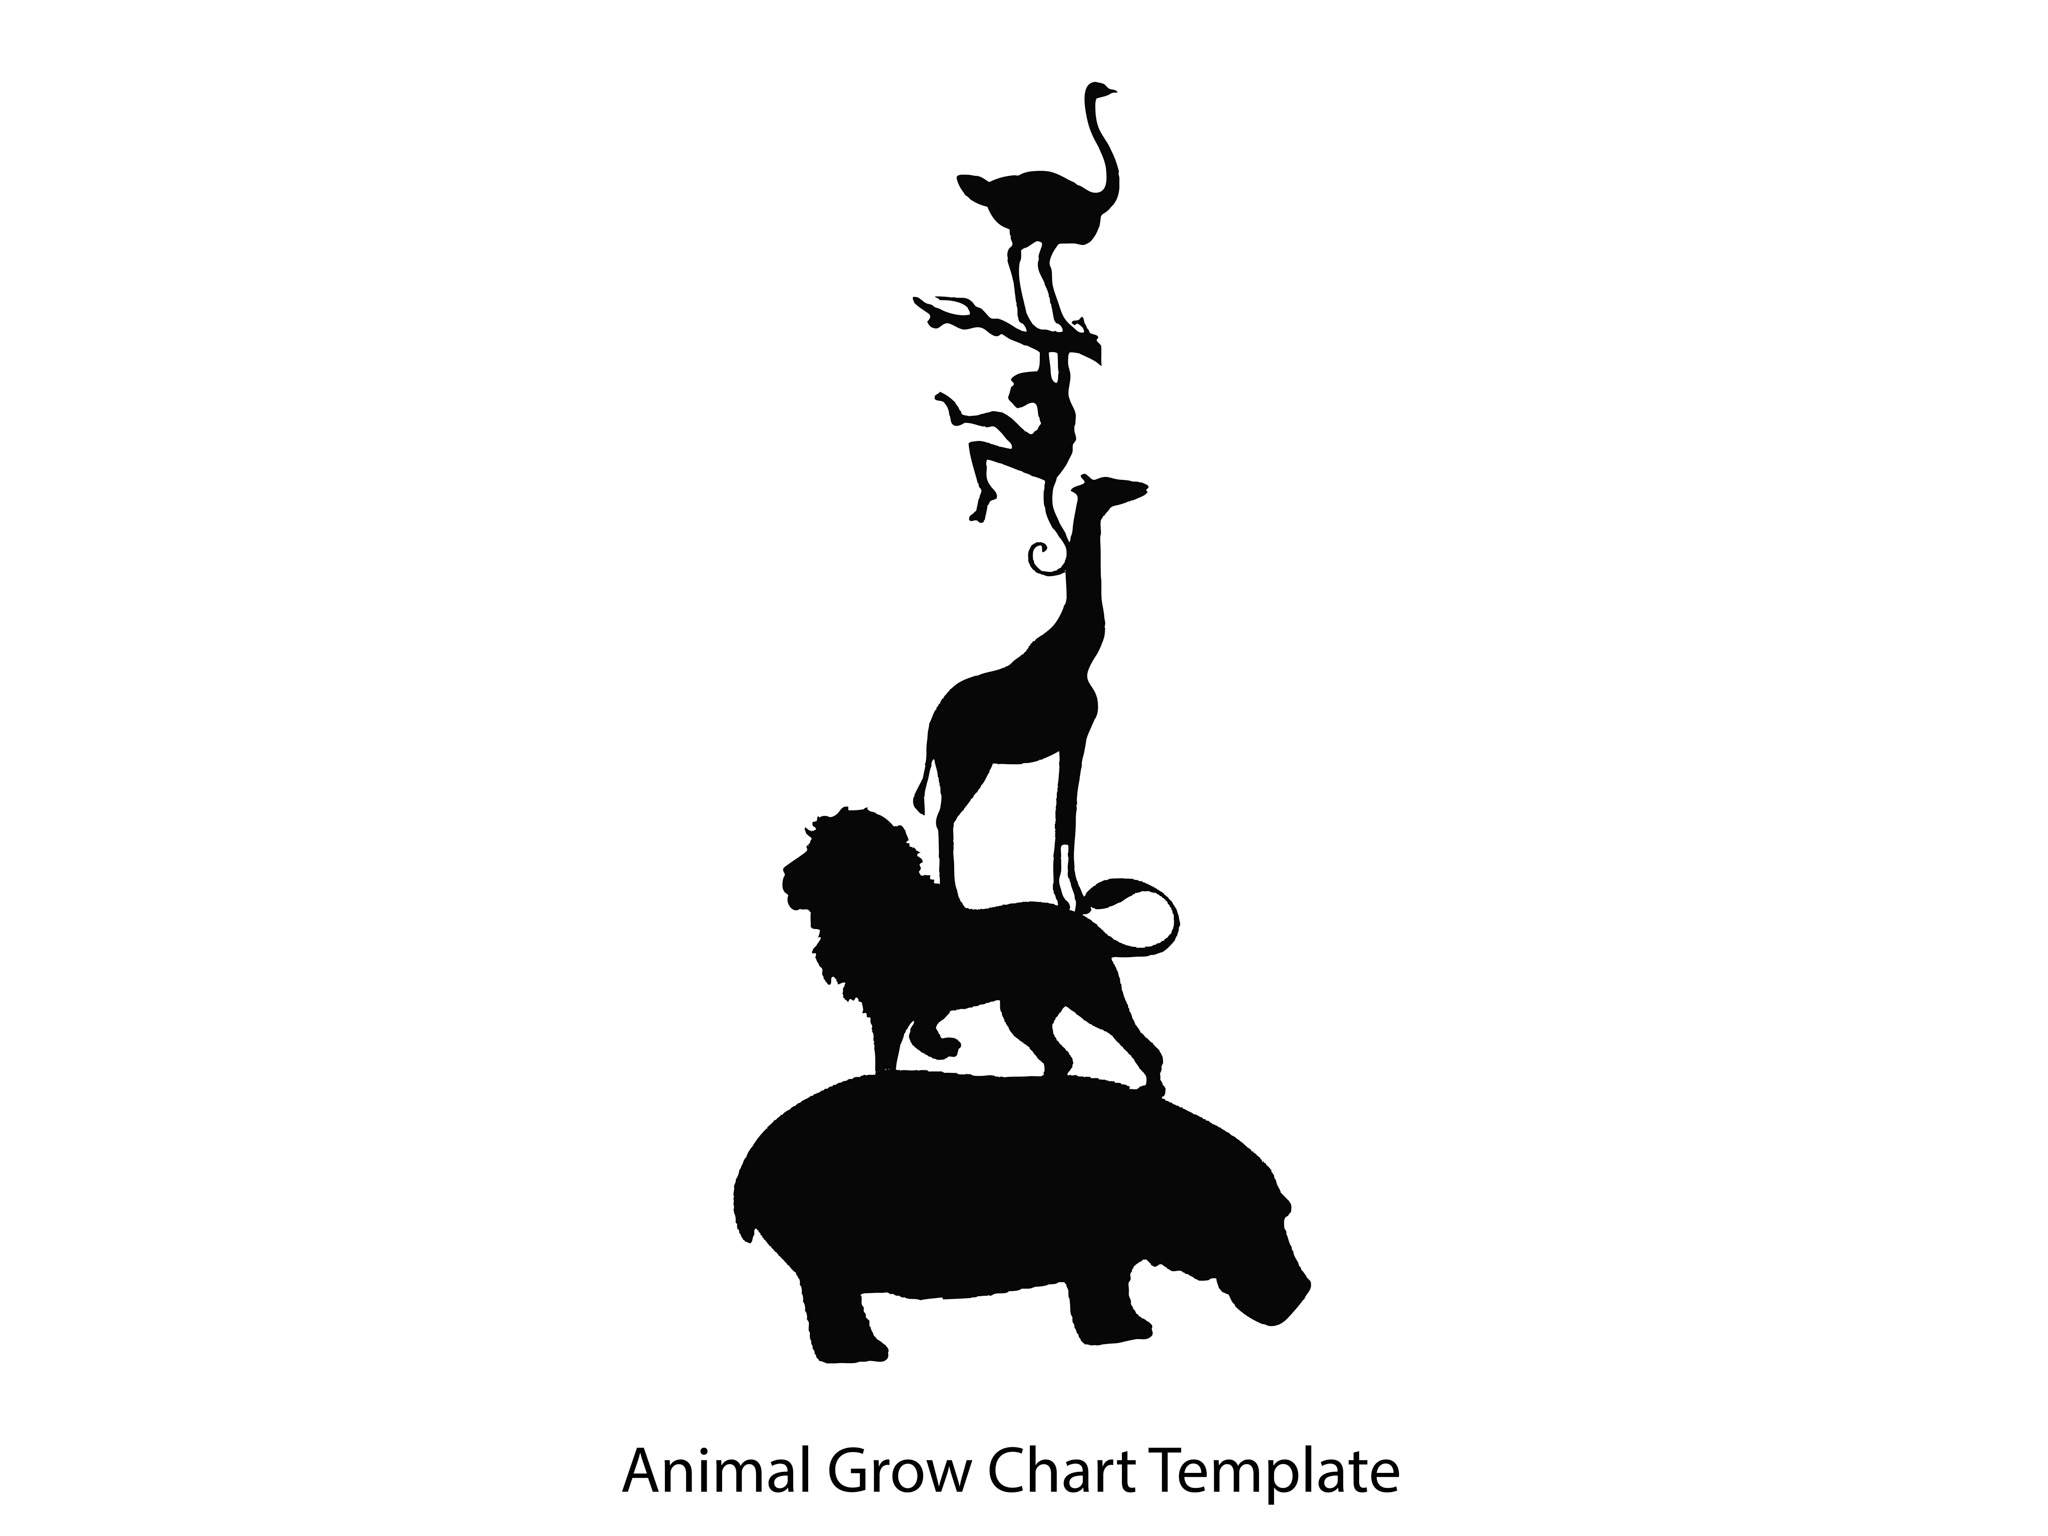 Make an Animal Silhouette Growth Chart | Easy Crafts and Homemade 